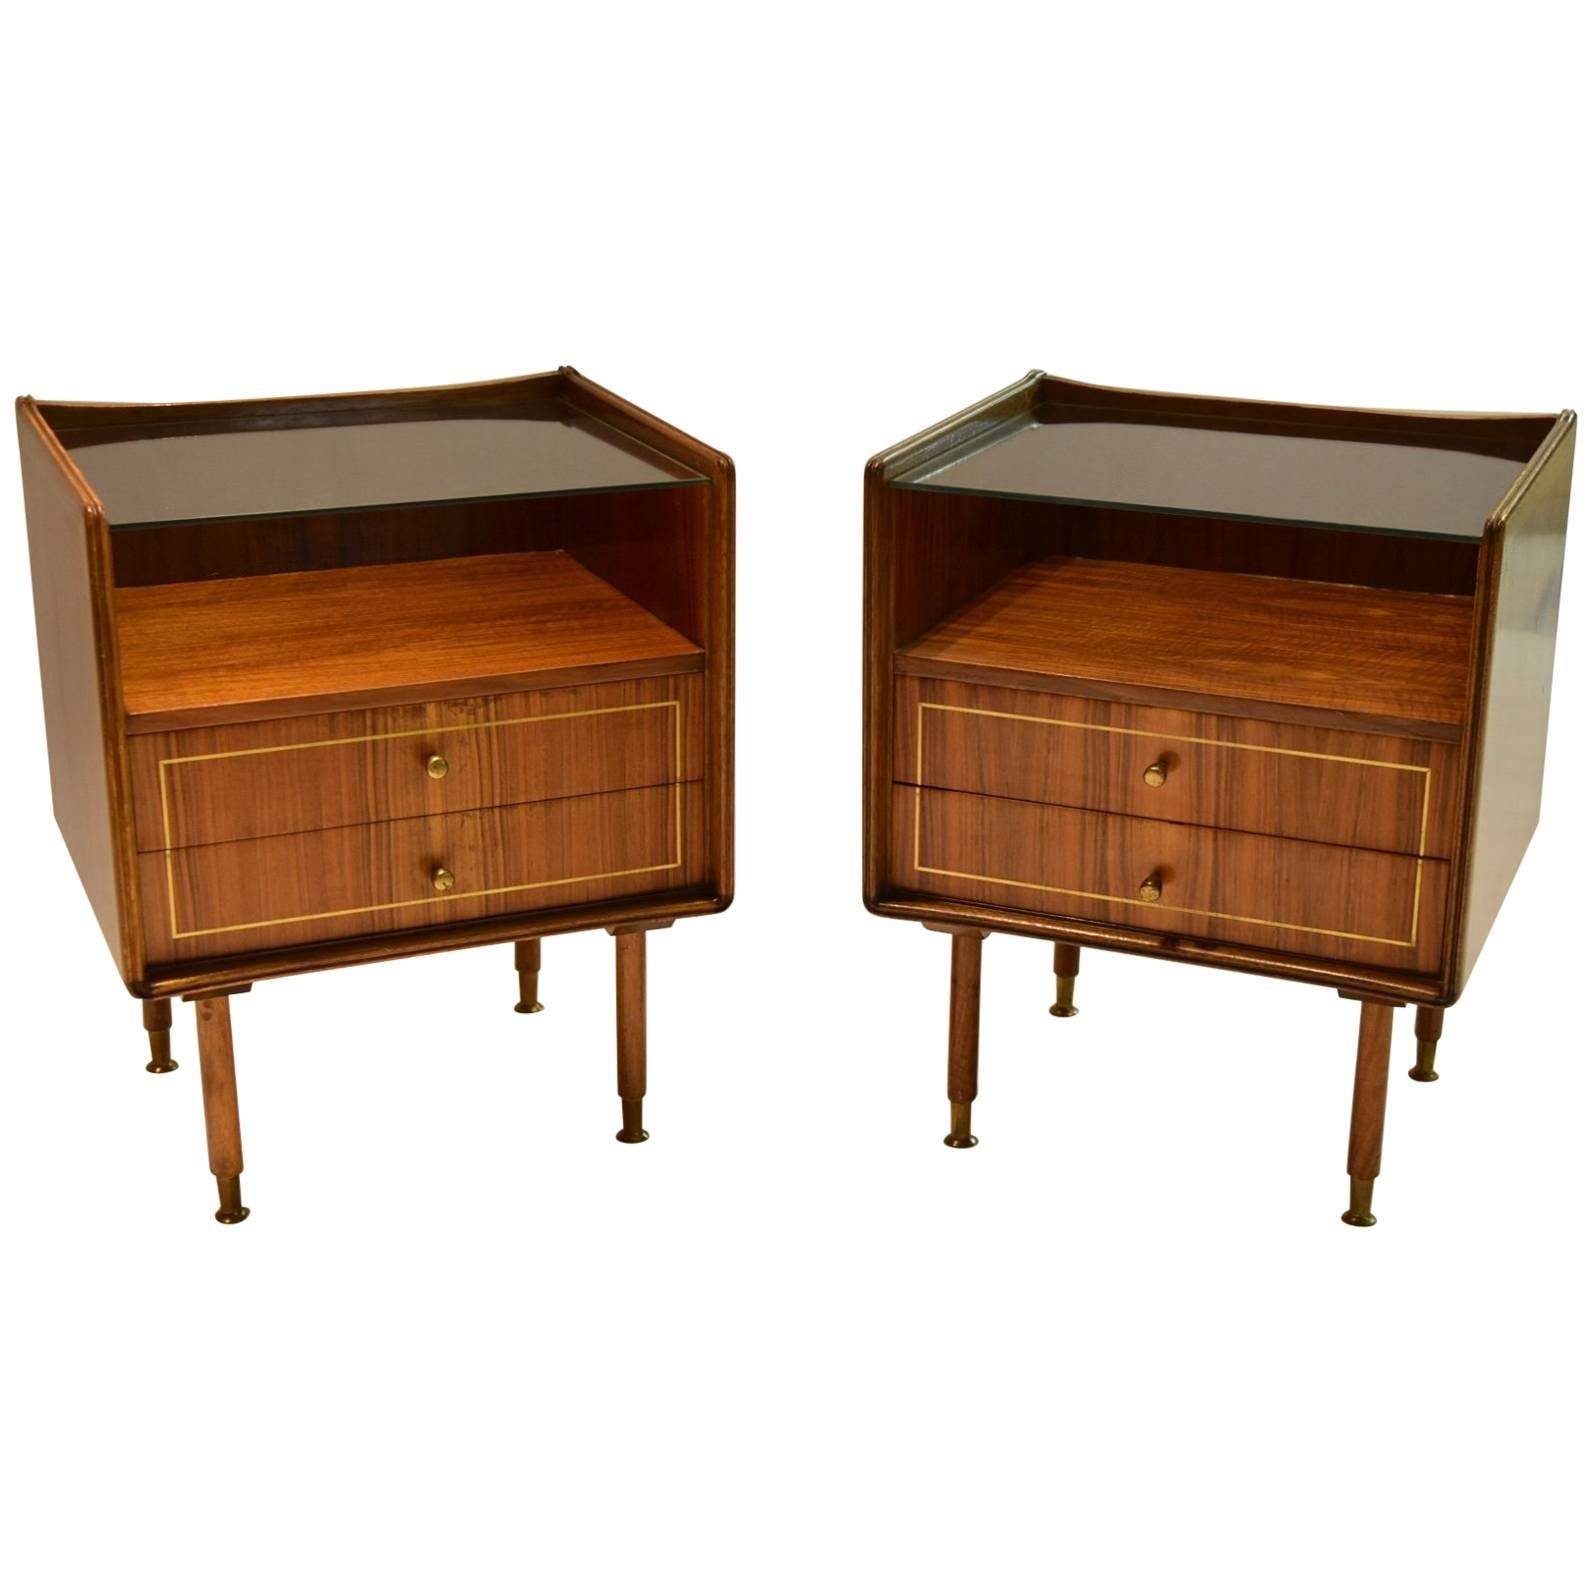 Pair of Night Stands, Made in Italy, 1950s